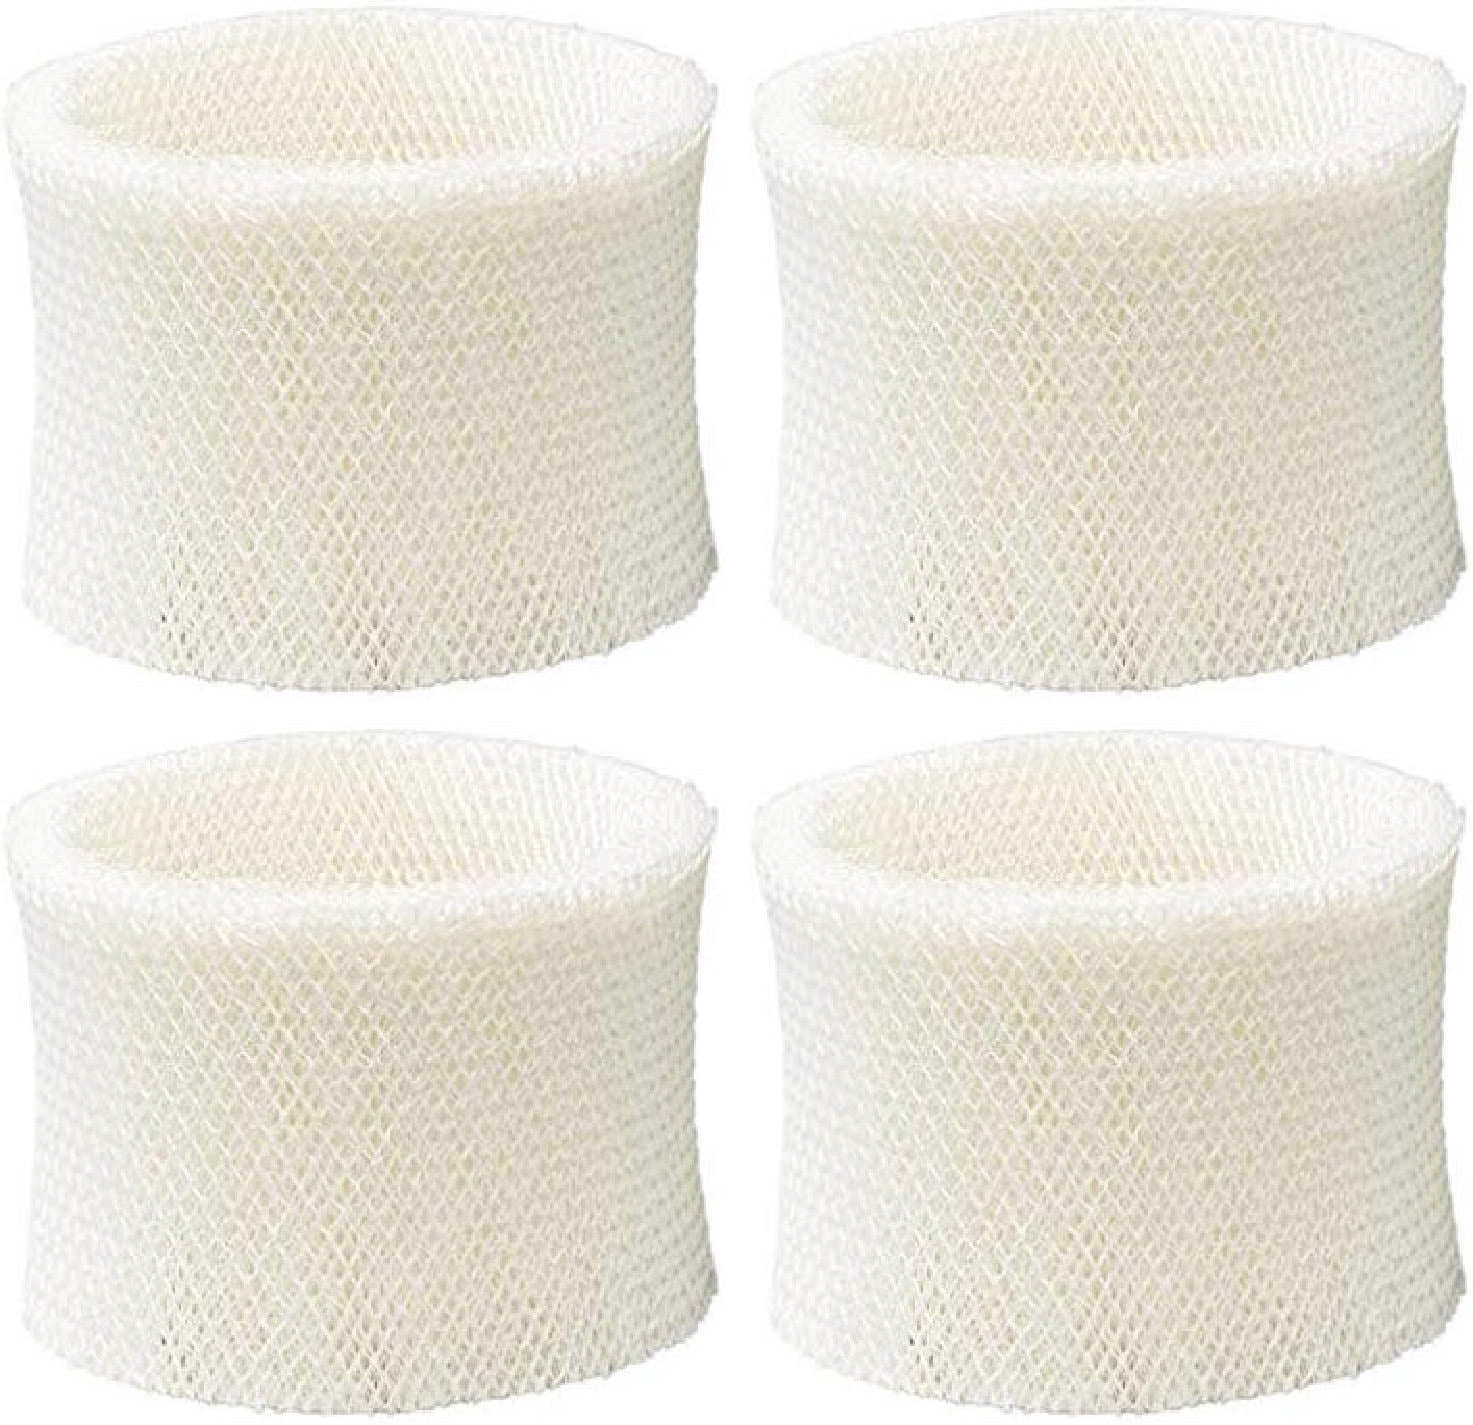 HM1895 Nispira 4 Packs Holmes Type C Filter HWF65 HWF65PDQ-U Compatible Humidifier Wick Filter Replacement Fits HM1865 SCM1895 SCM1866